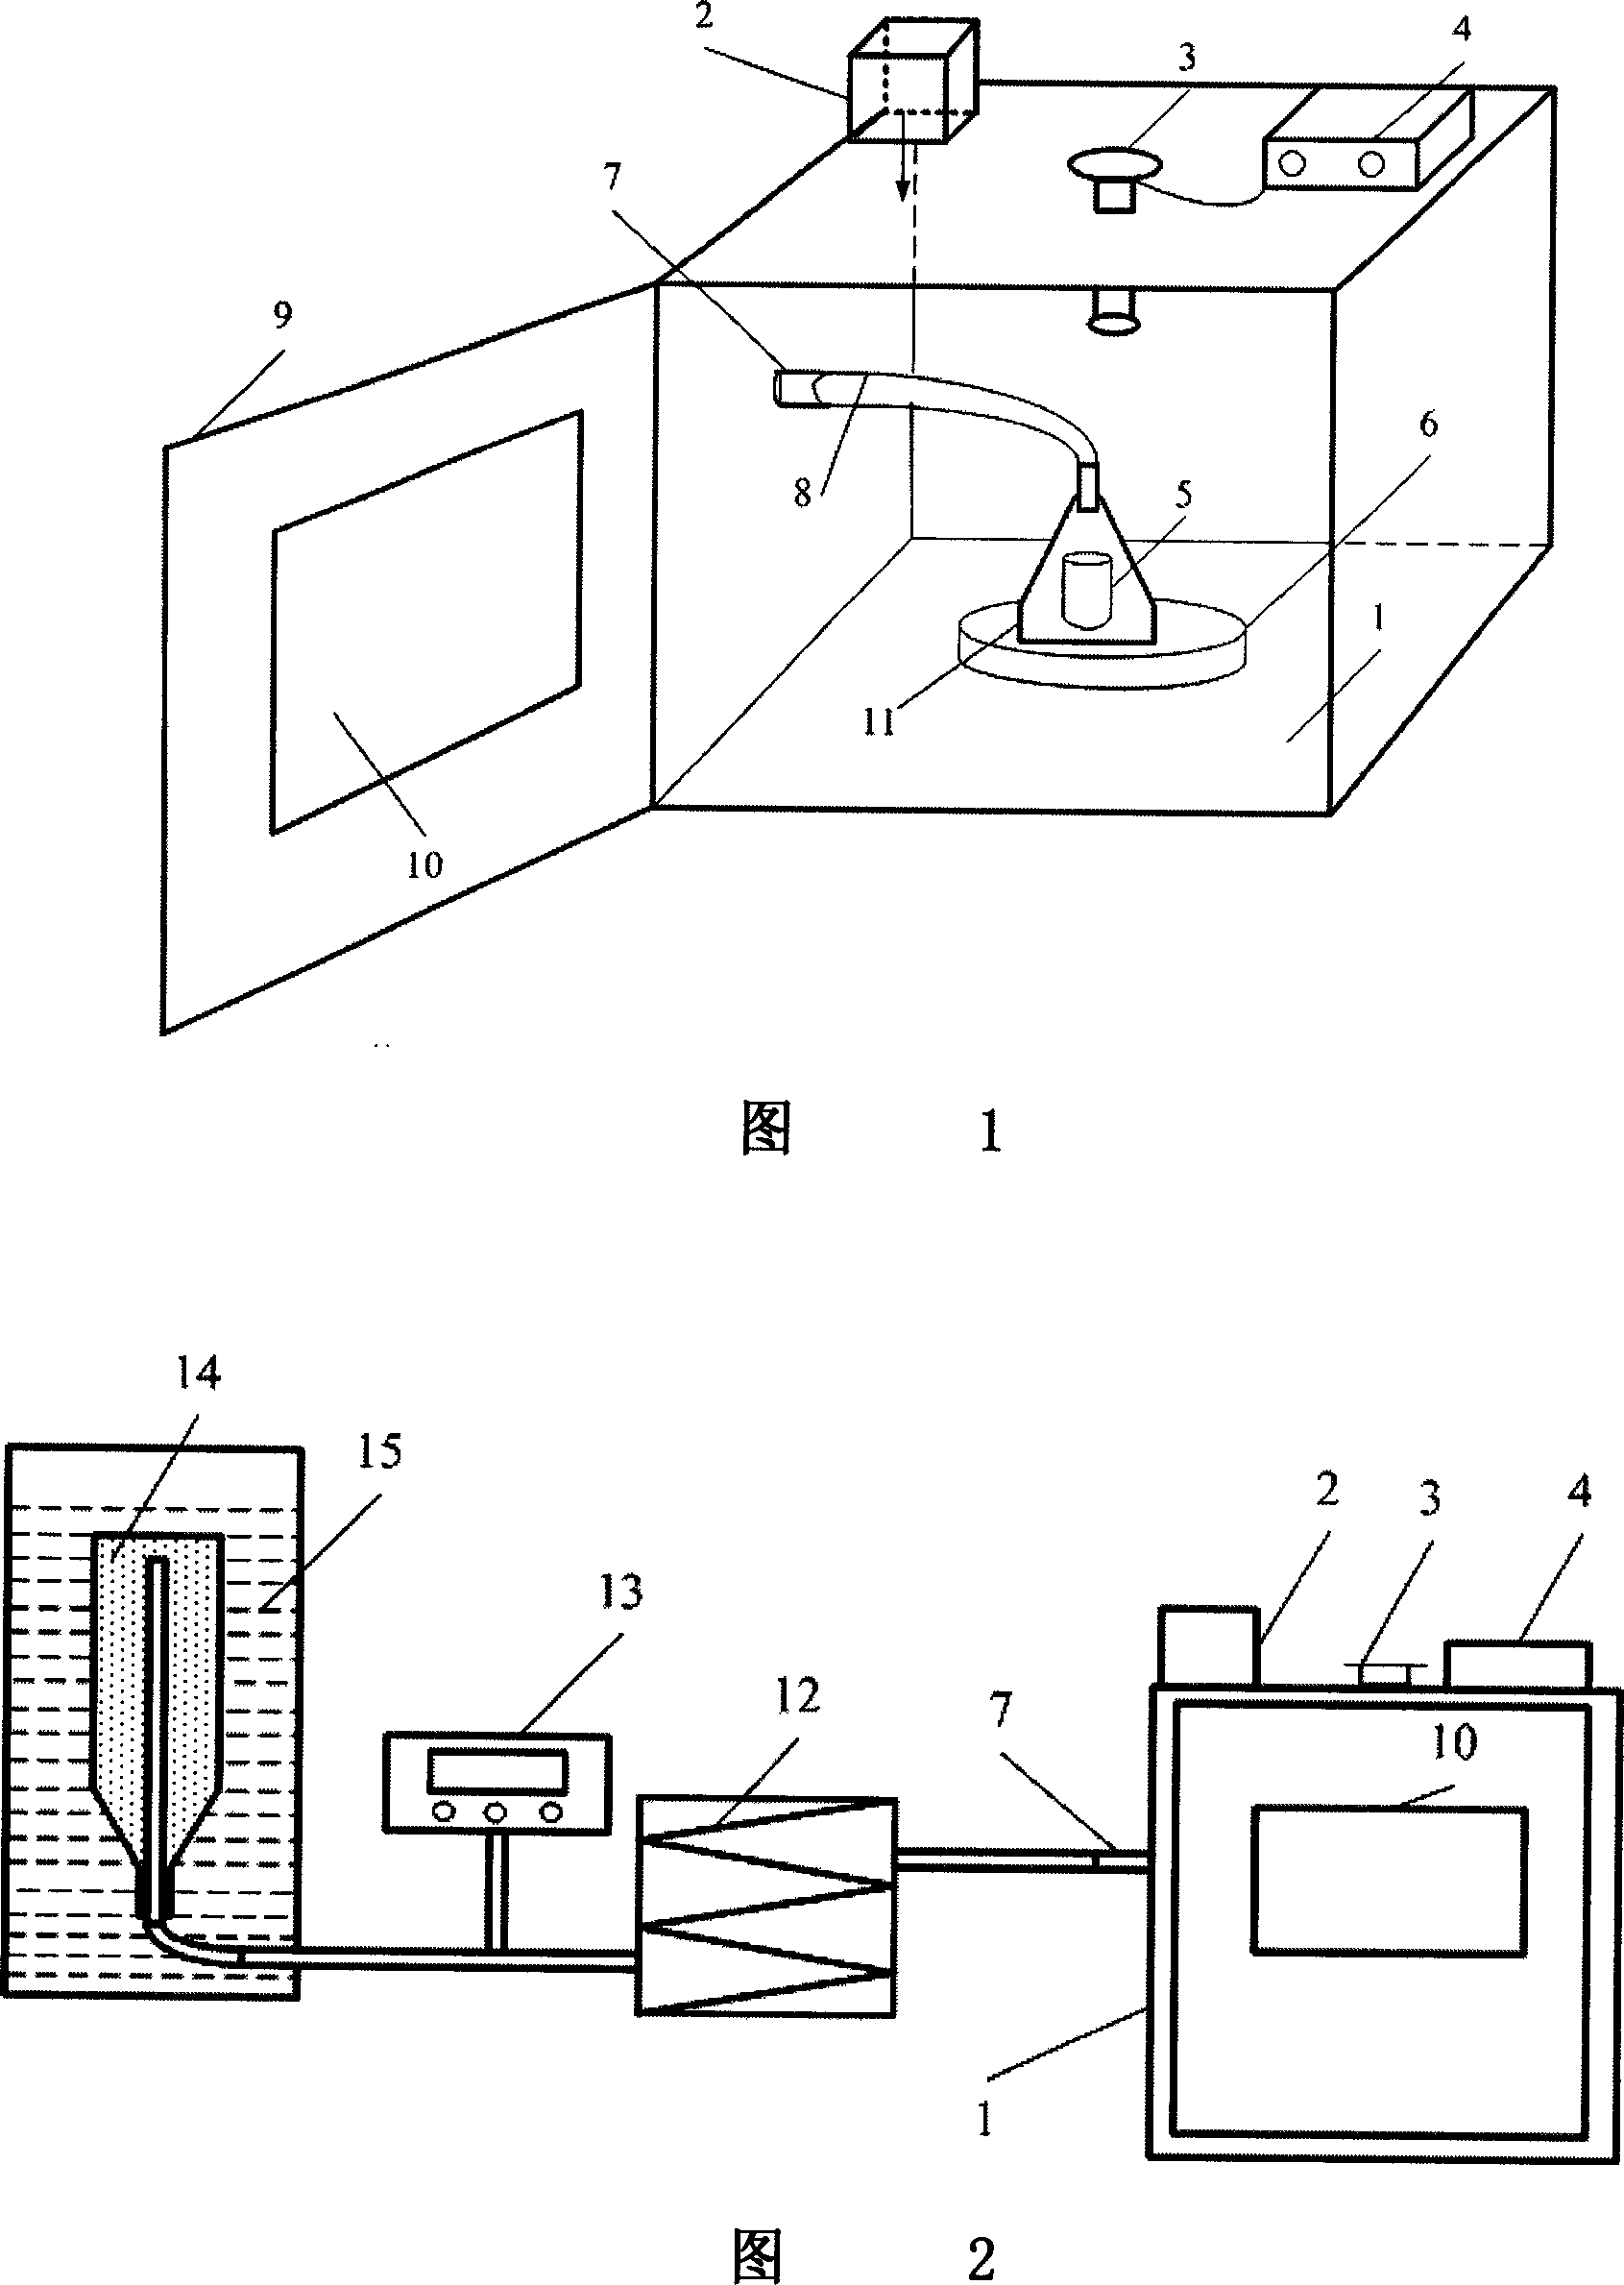 Method for producing oxygen by microwave heated oxygen candle and oxygen candle and microwave device